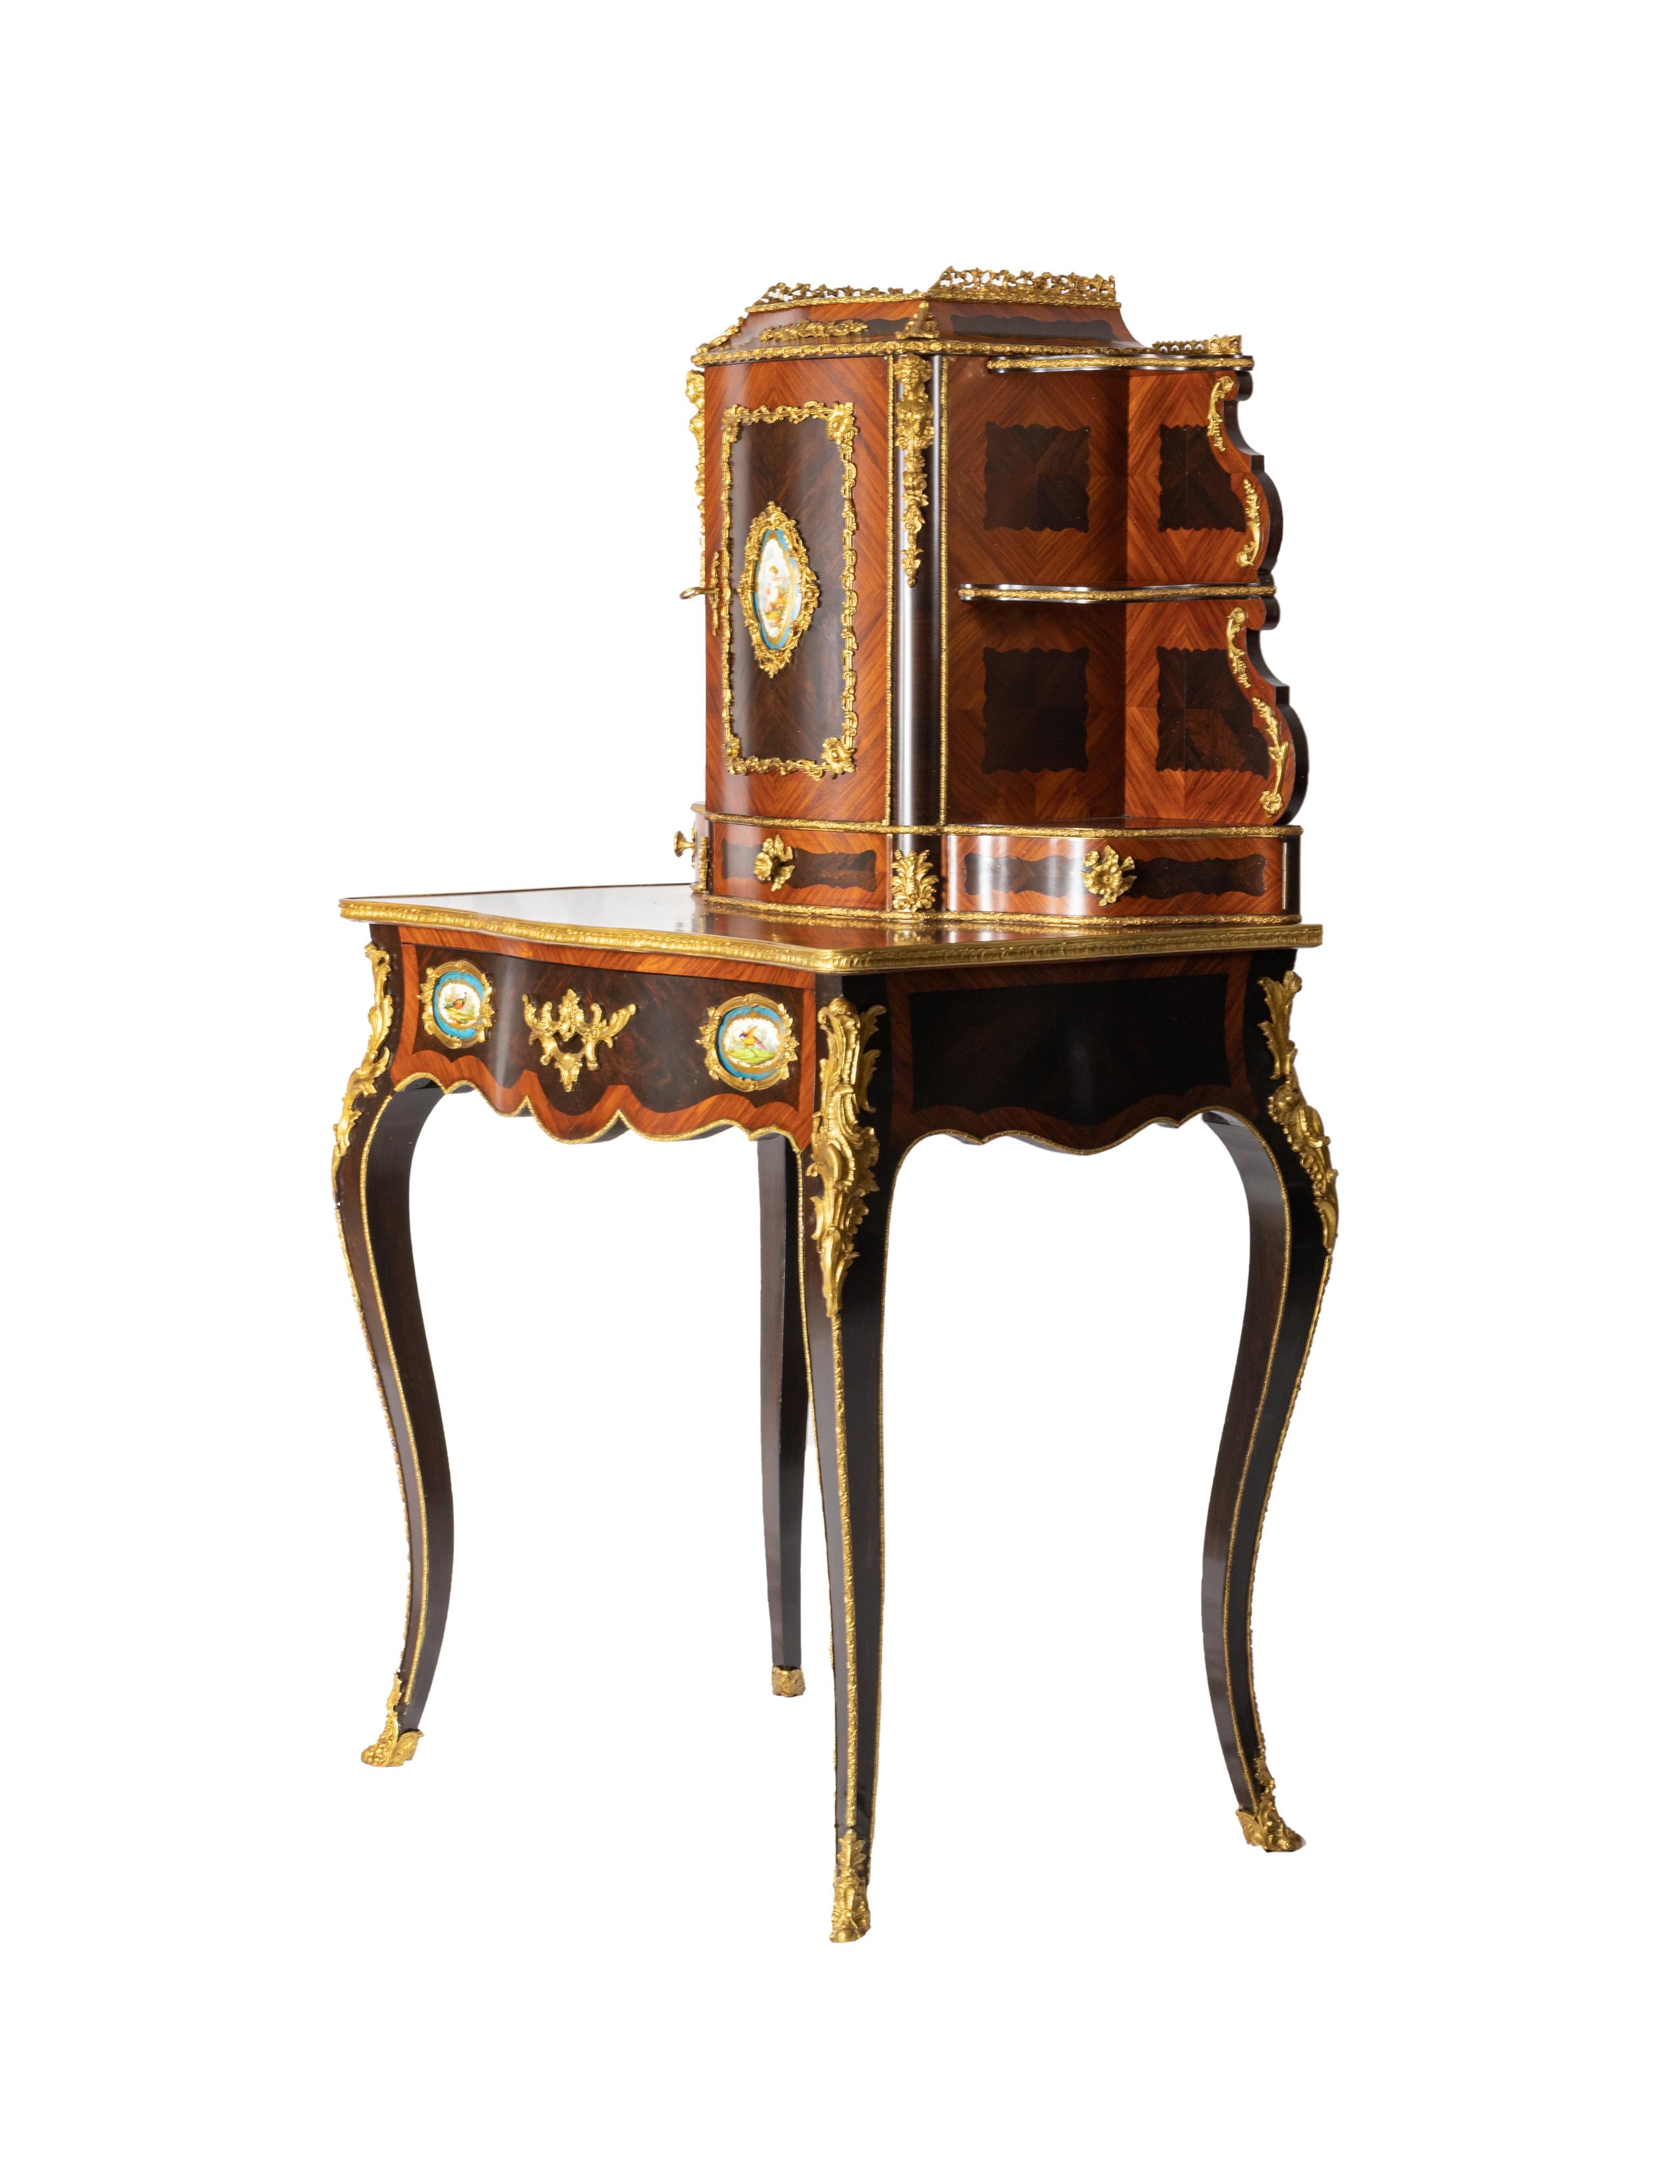 Napoléon III Gilt-Bronze and Sèvres Style Ormolu mounted Bonheur du
Jour by Louis Grade.
This beautiful Bonheur du Jour is a superb example of the taste, artistic sensibilities and
craftsmanship that prevailed during the reign of Napoleon III. 
The